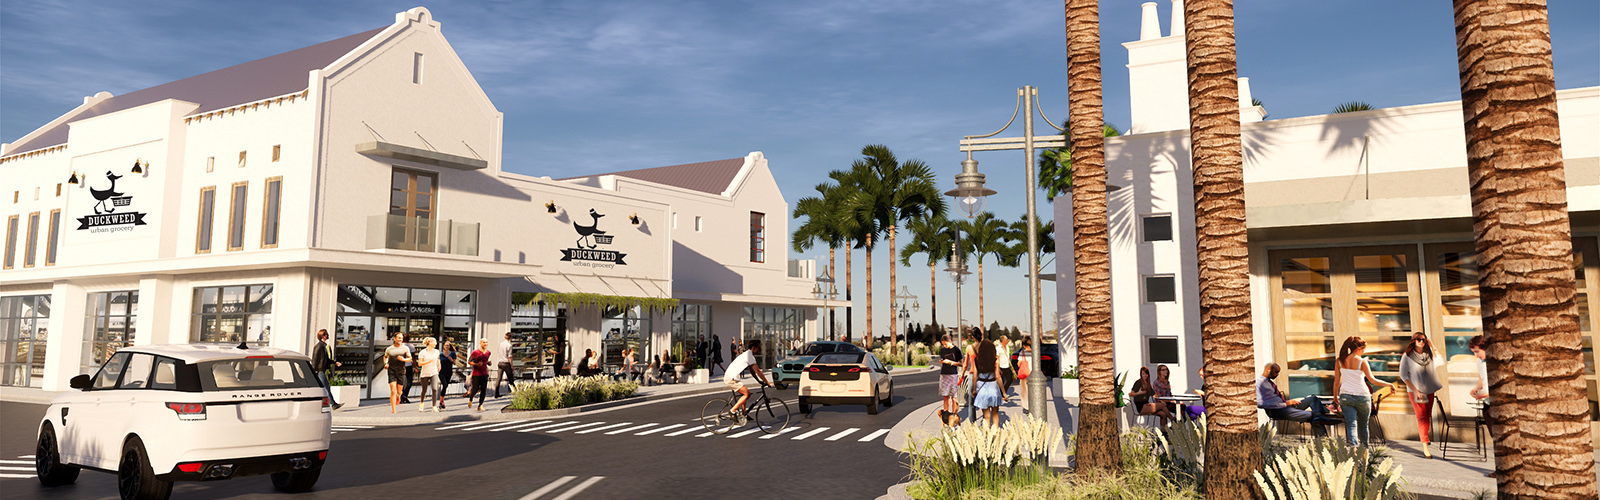 An illustration of what Duckweed Urban Market might look like at the Westshore Marina District.